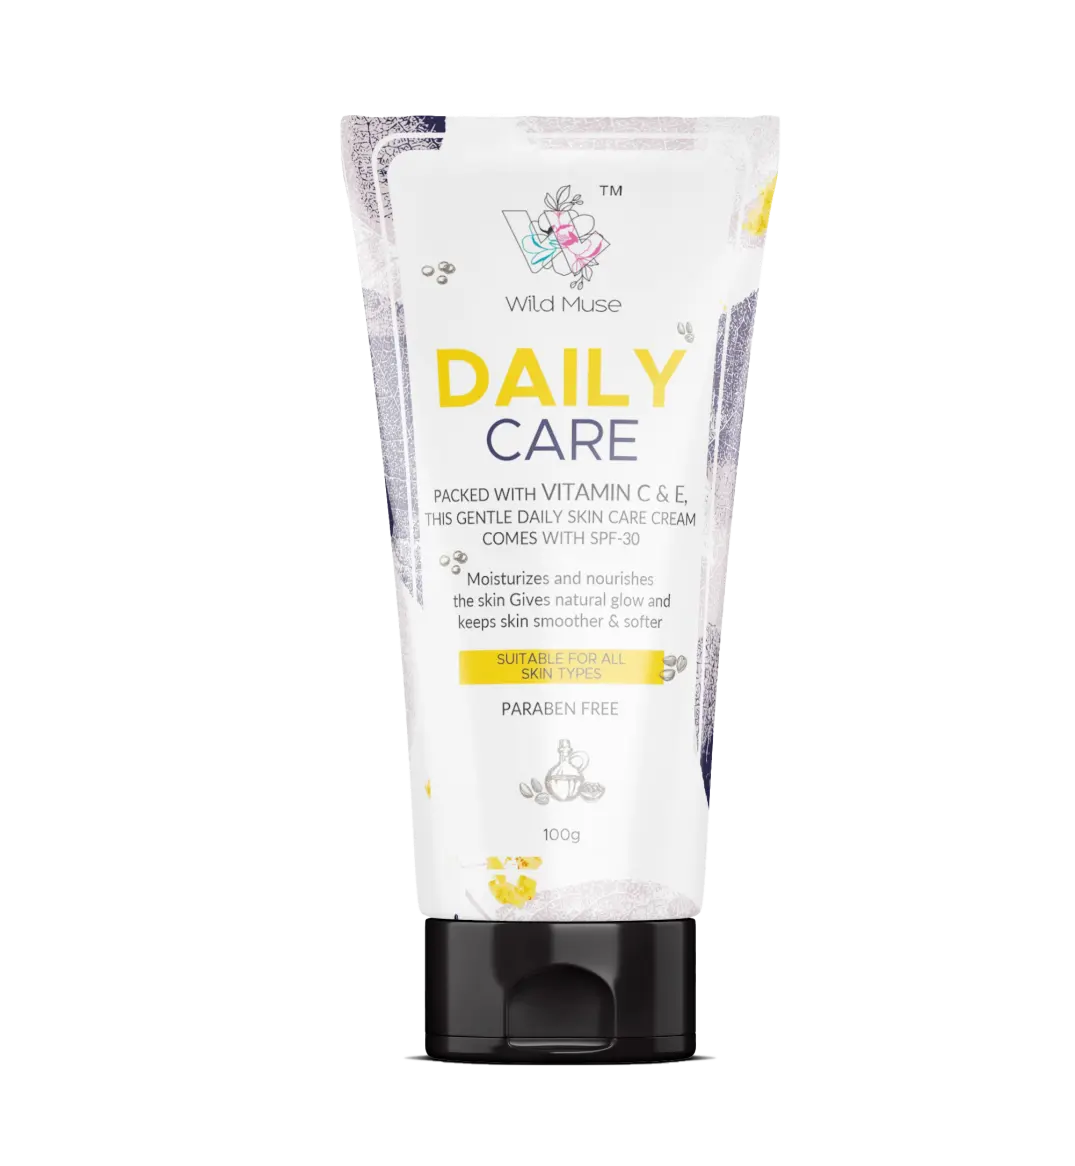 Wild Muse Daily Care Cream with SPF 30- glow skin naturally